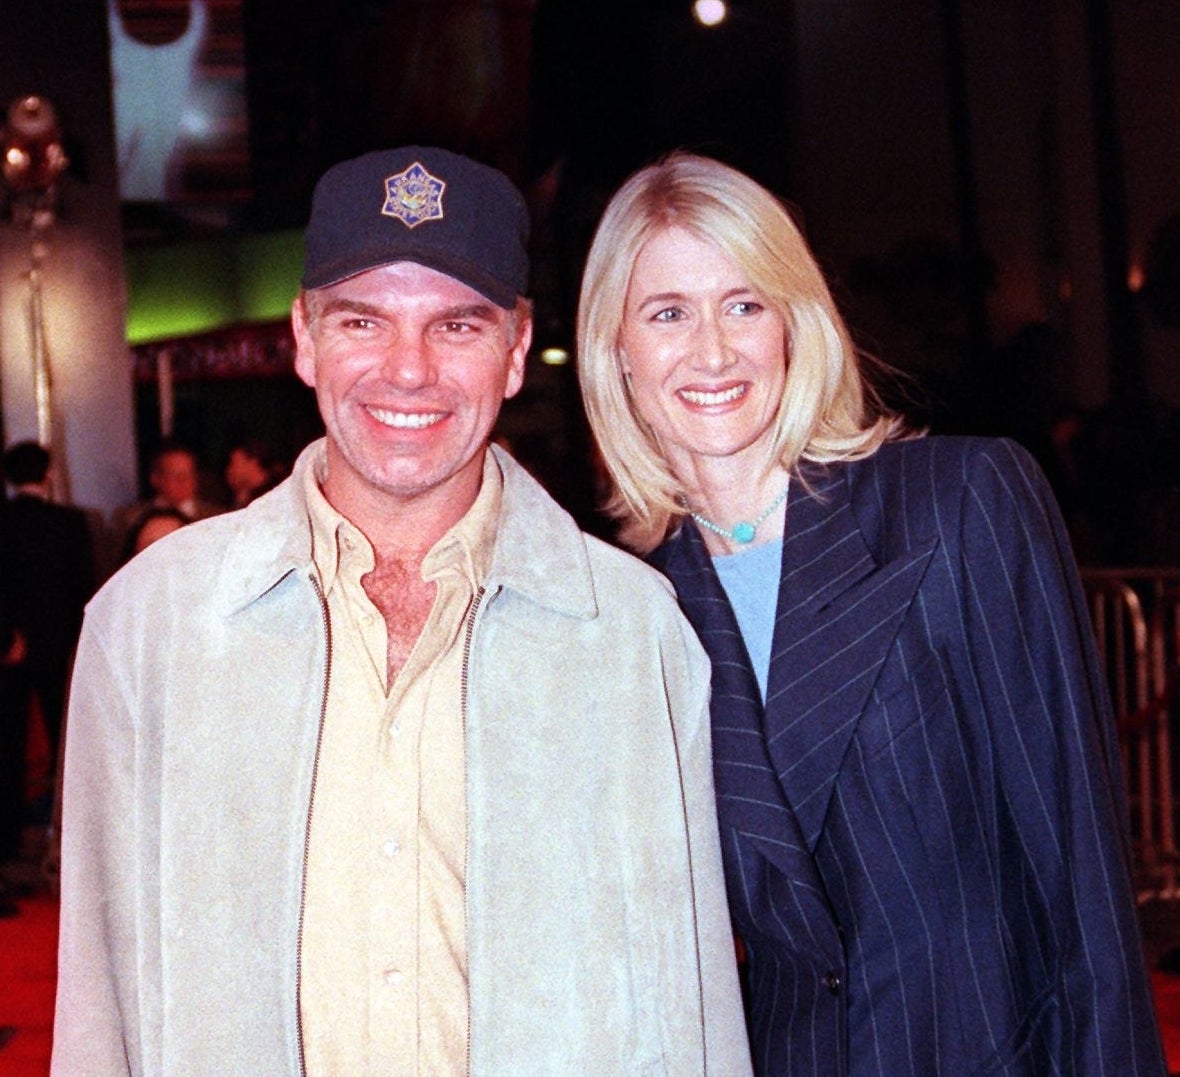 Photo of Billy Bob Thornton and Laura Dern at a premiere